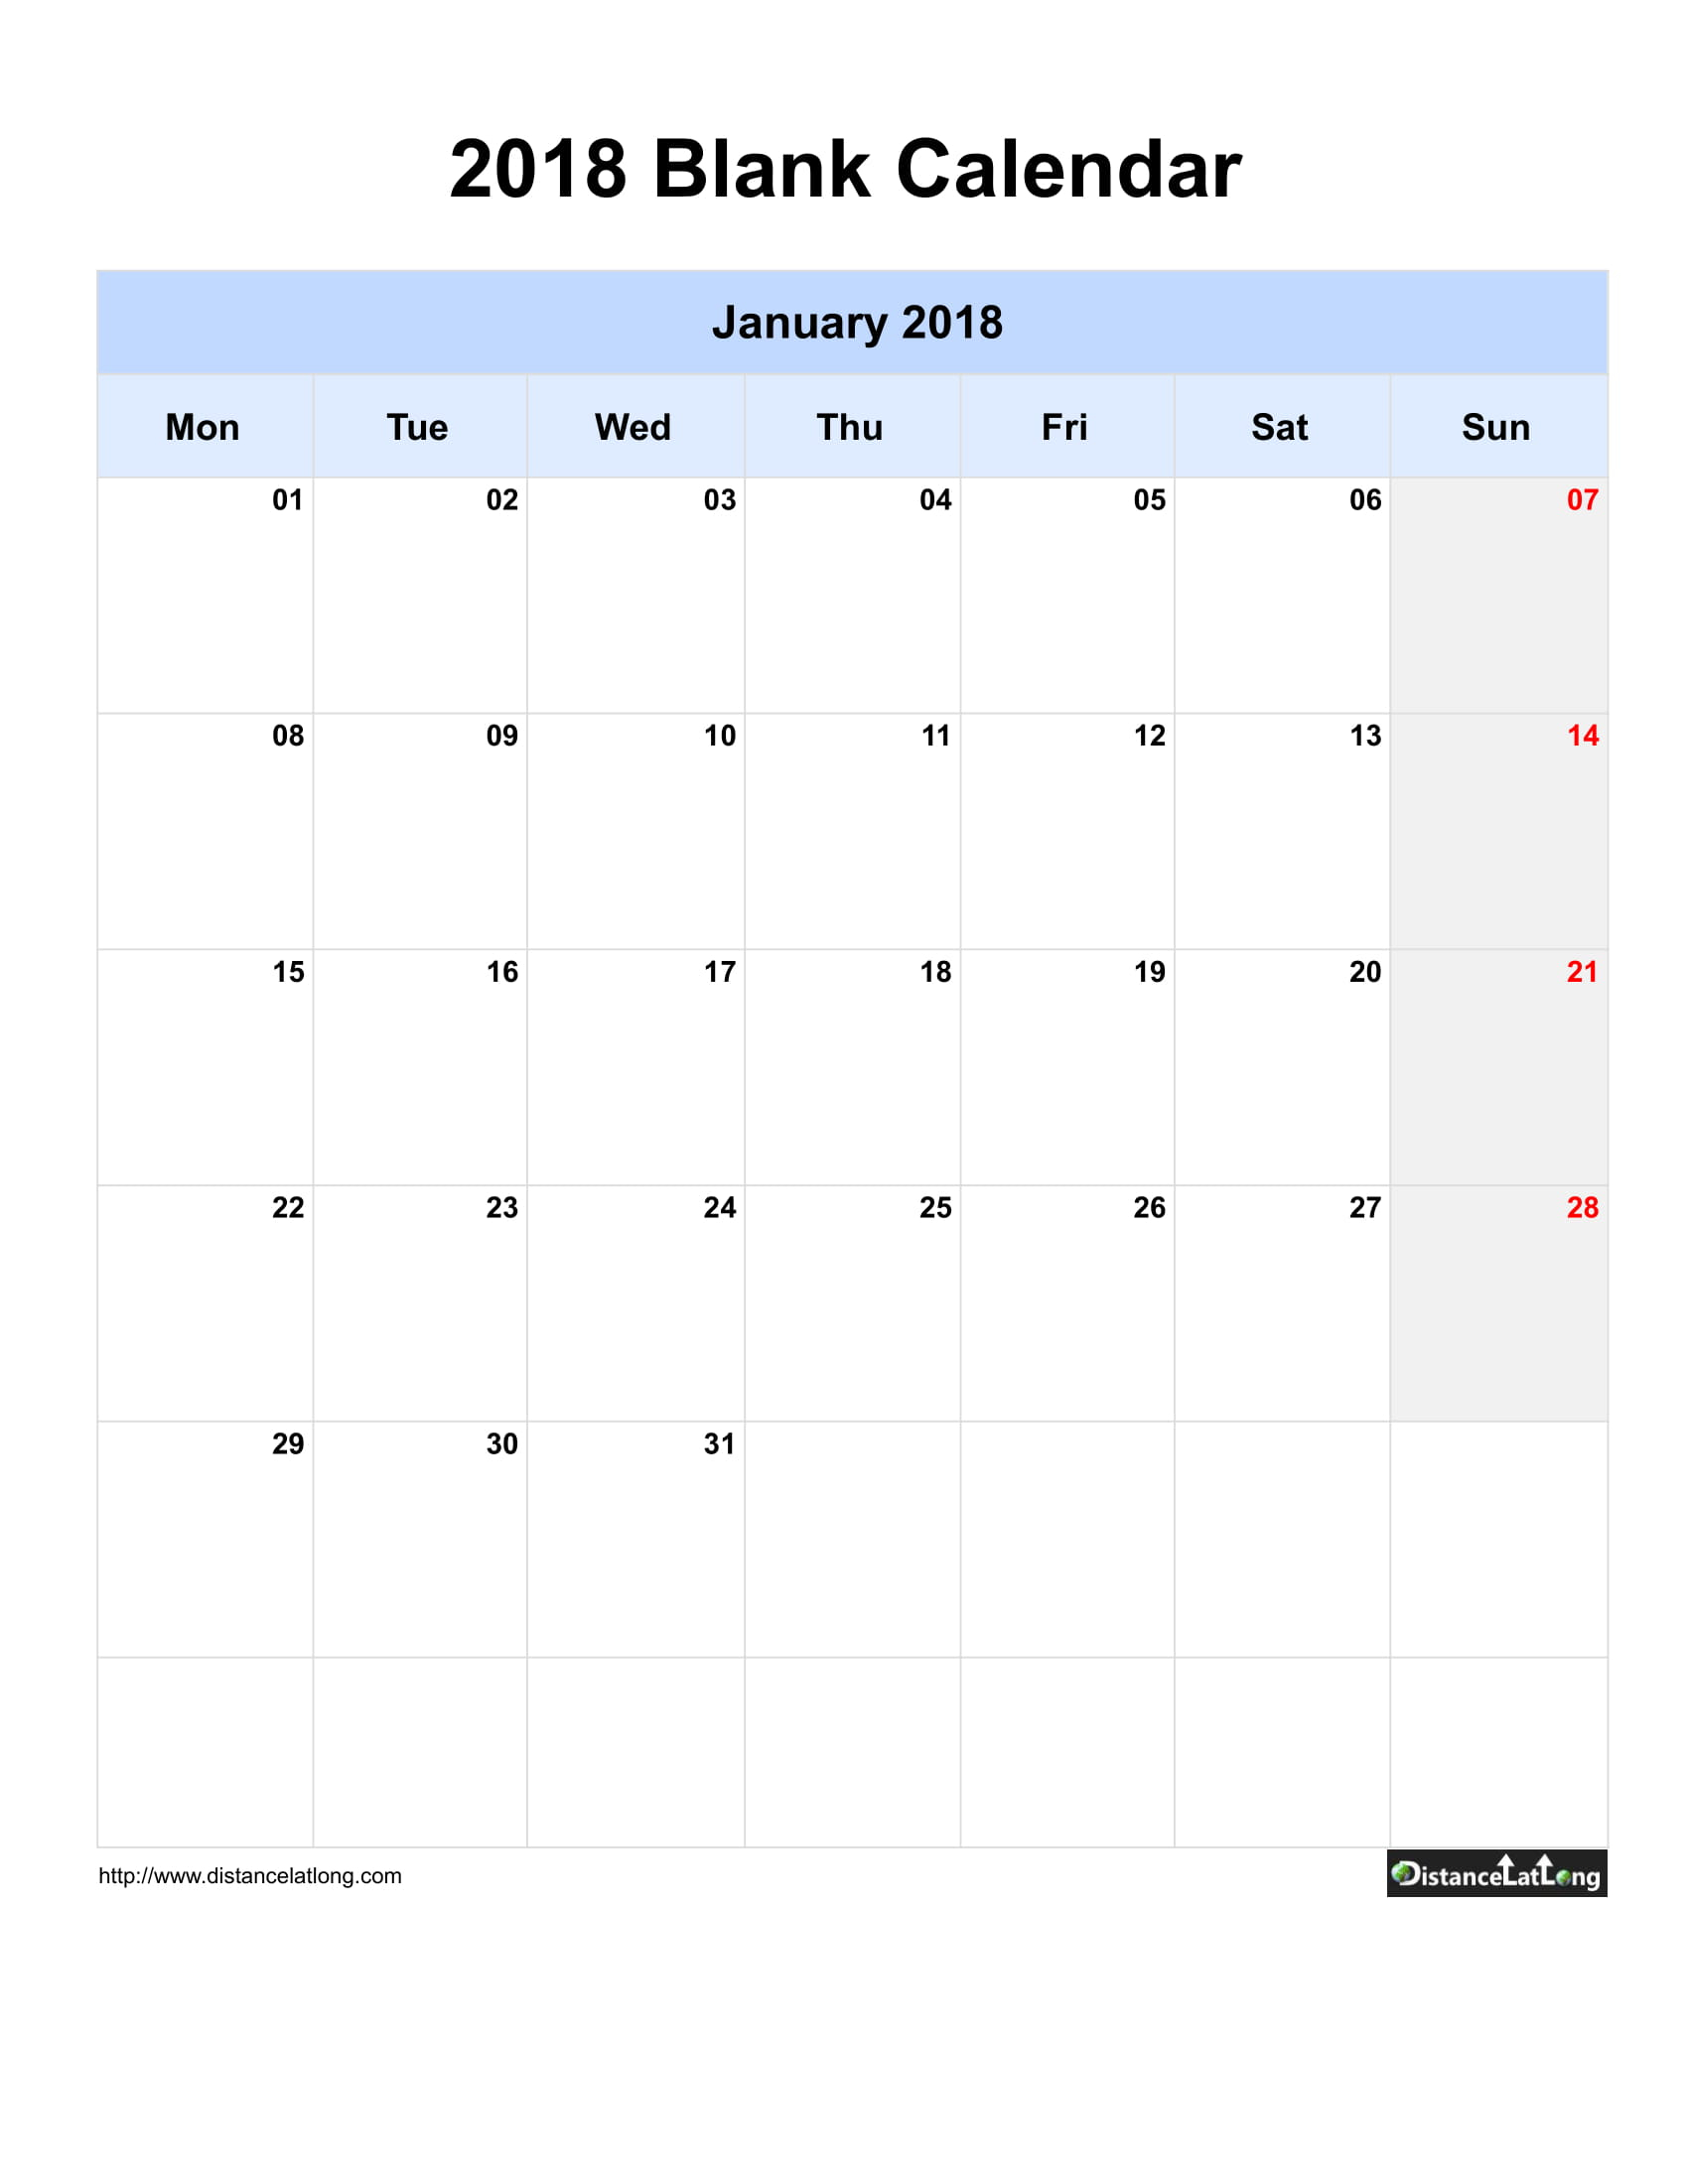 Collect One Calender Page For January Calendar Printables Free Blank